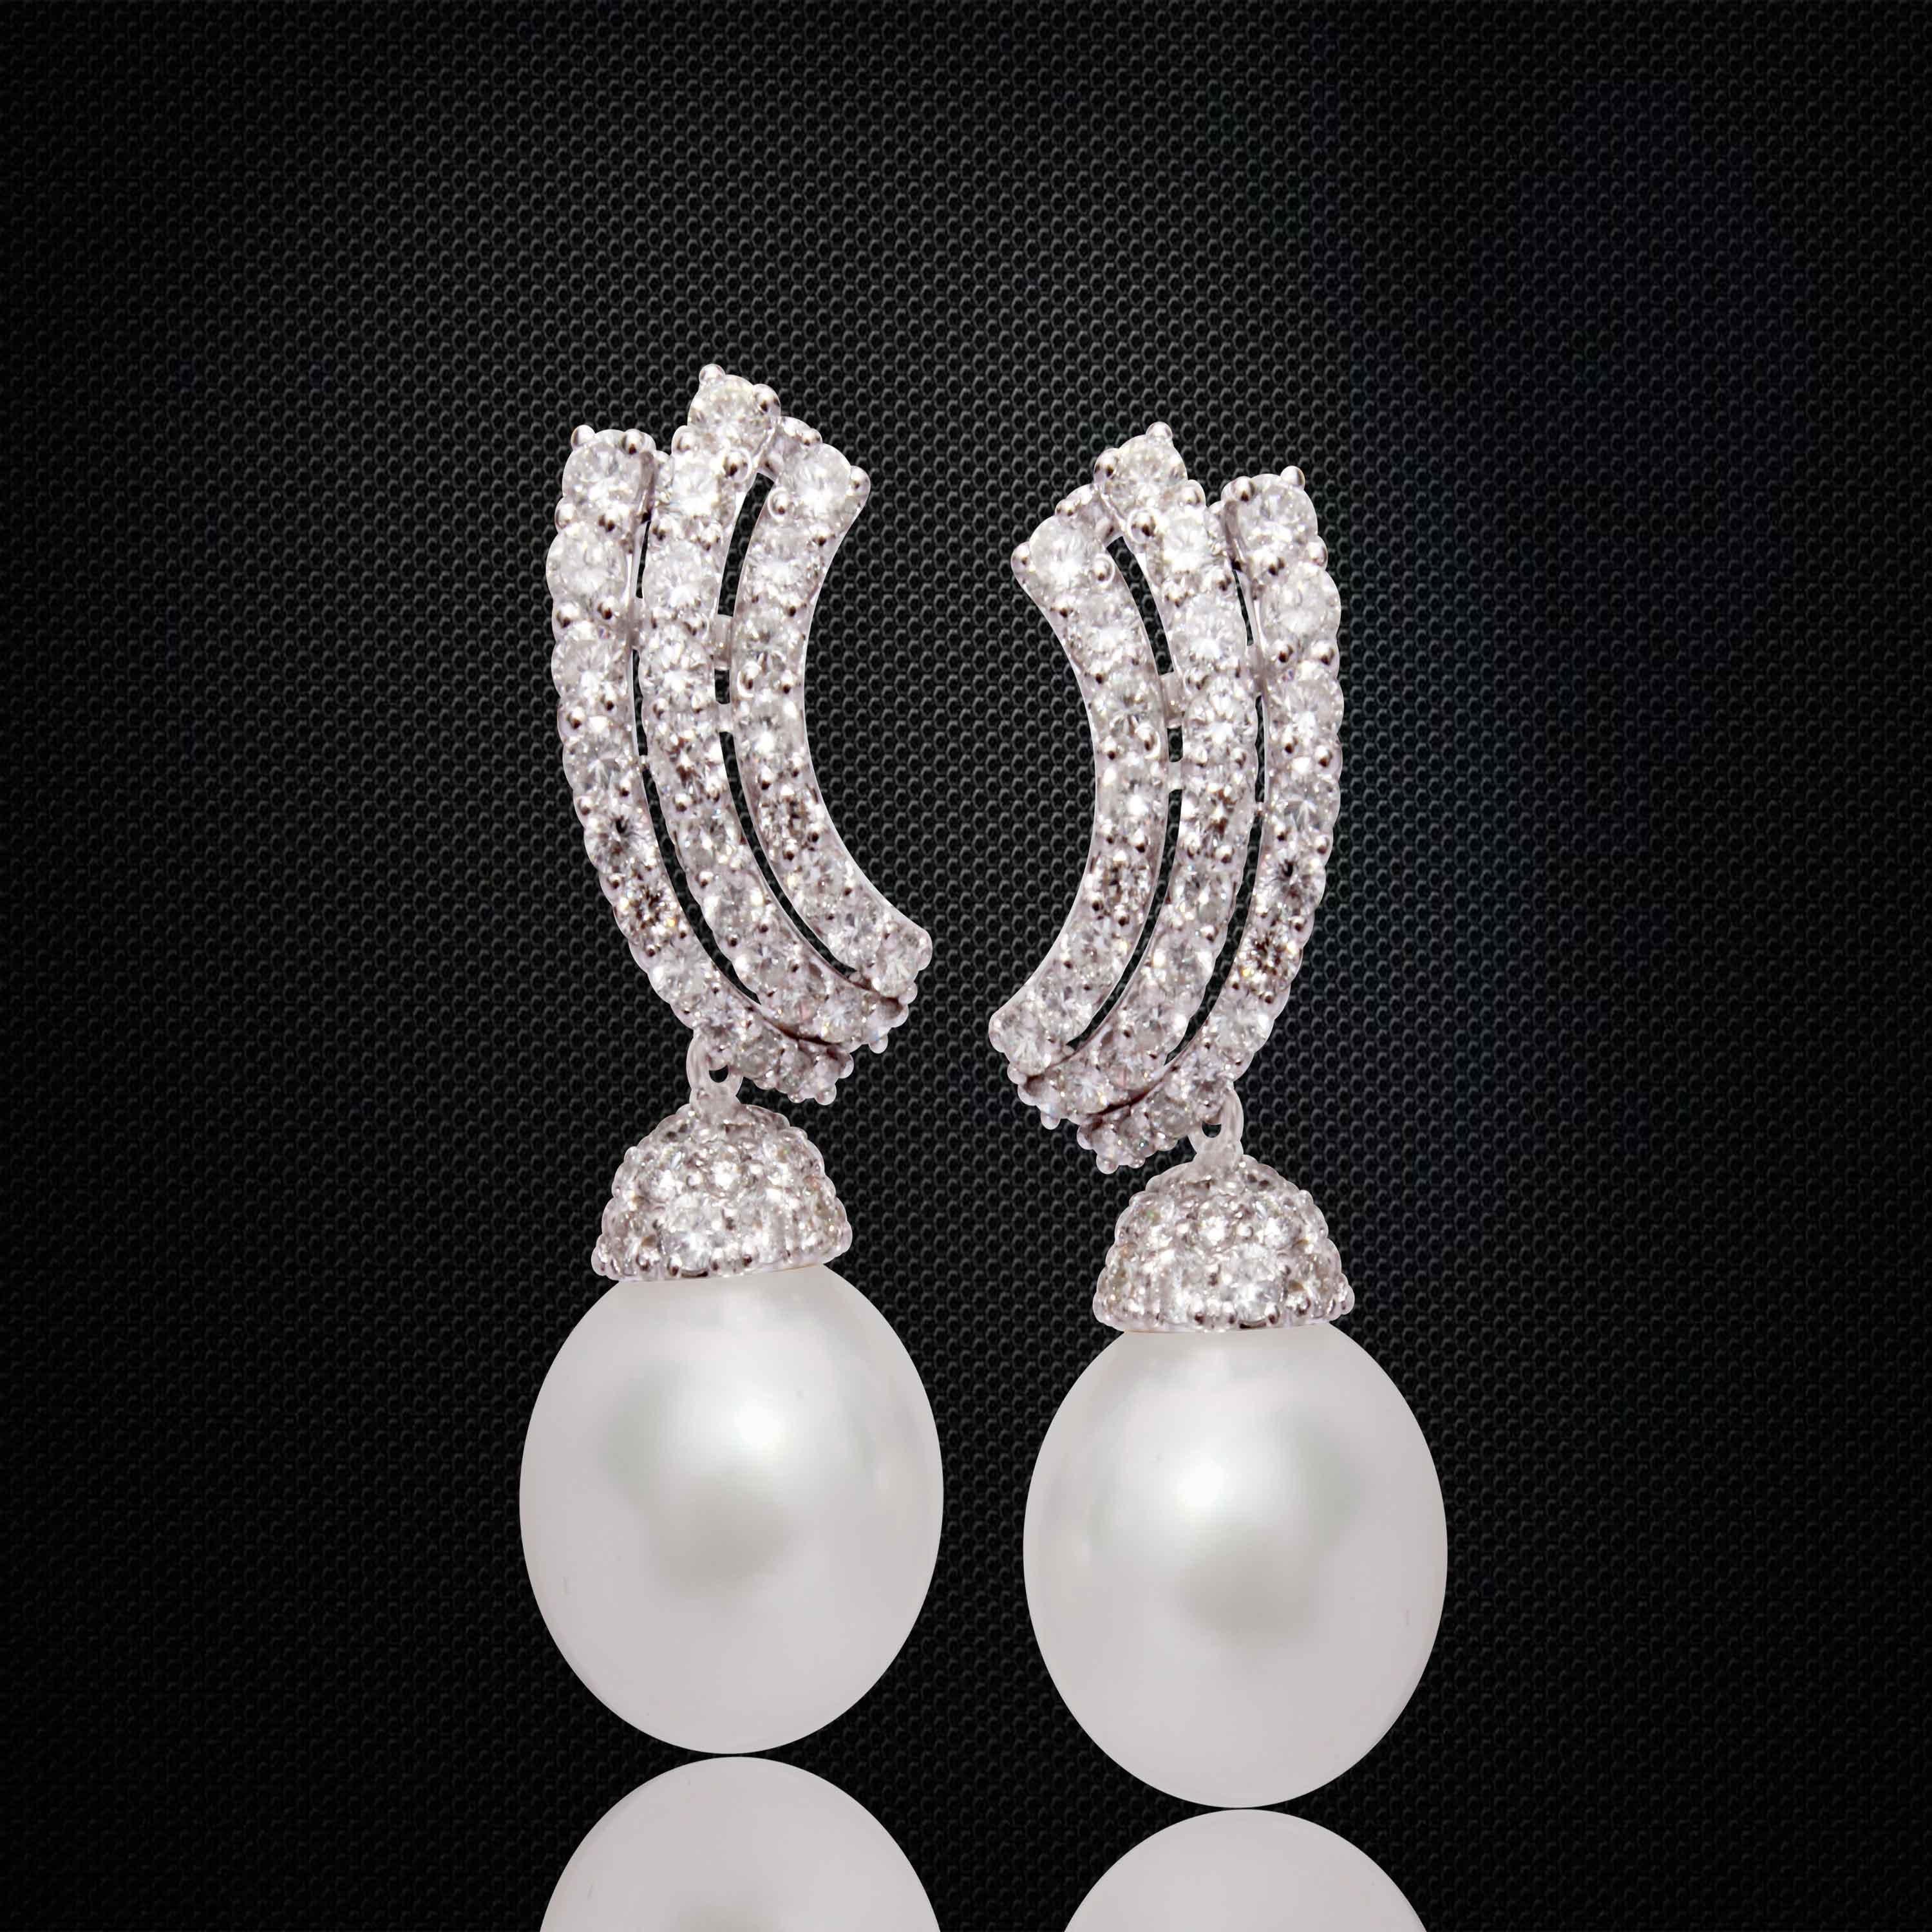 This dazzling Earrings has pair of Pearls with a weight of 39.00 carats, and it has 110 pieces of Round Cut White Diamond that weighs 3.83 carats. The Earrings are made in 18K White gold and weighs approximately 8.084 grams.